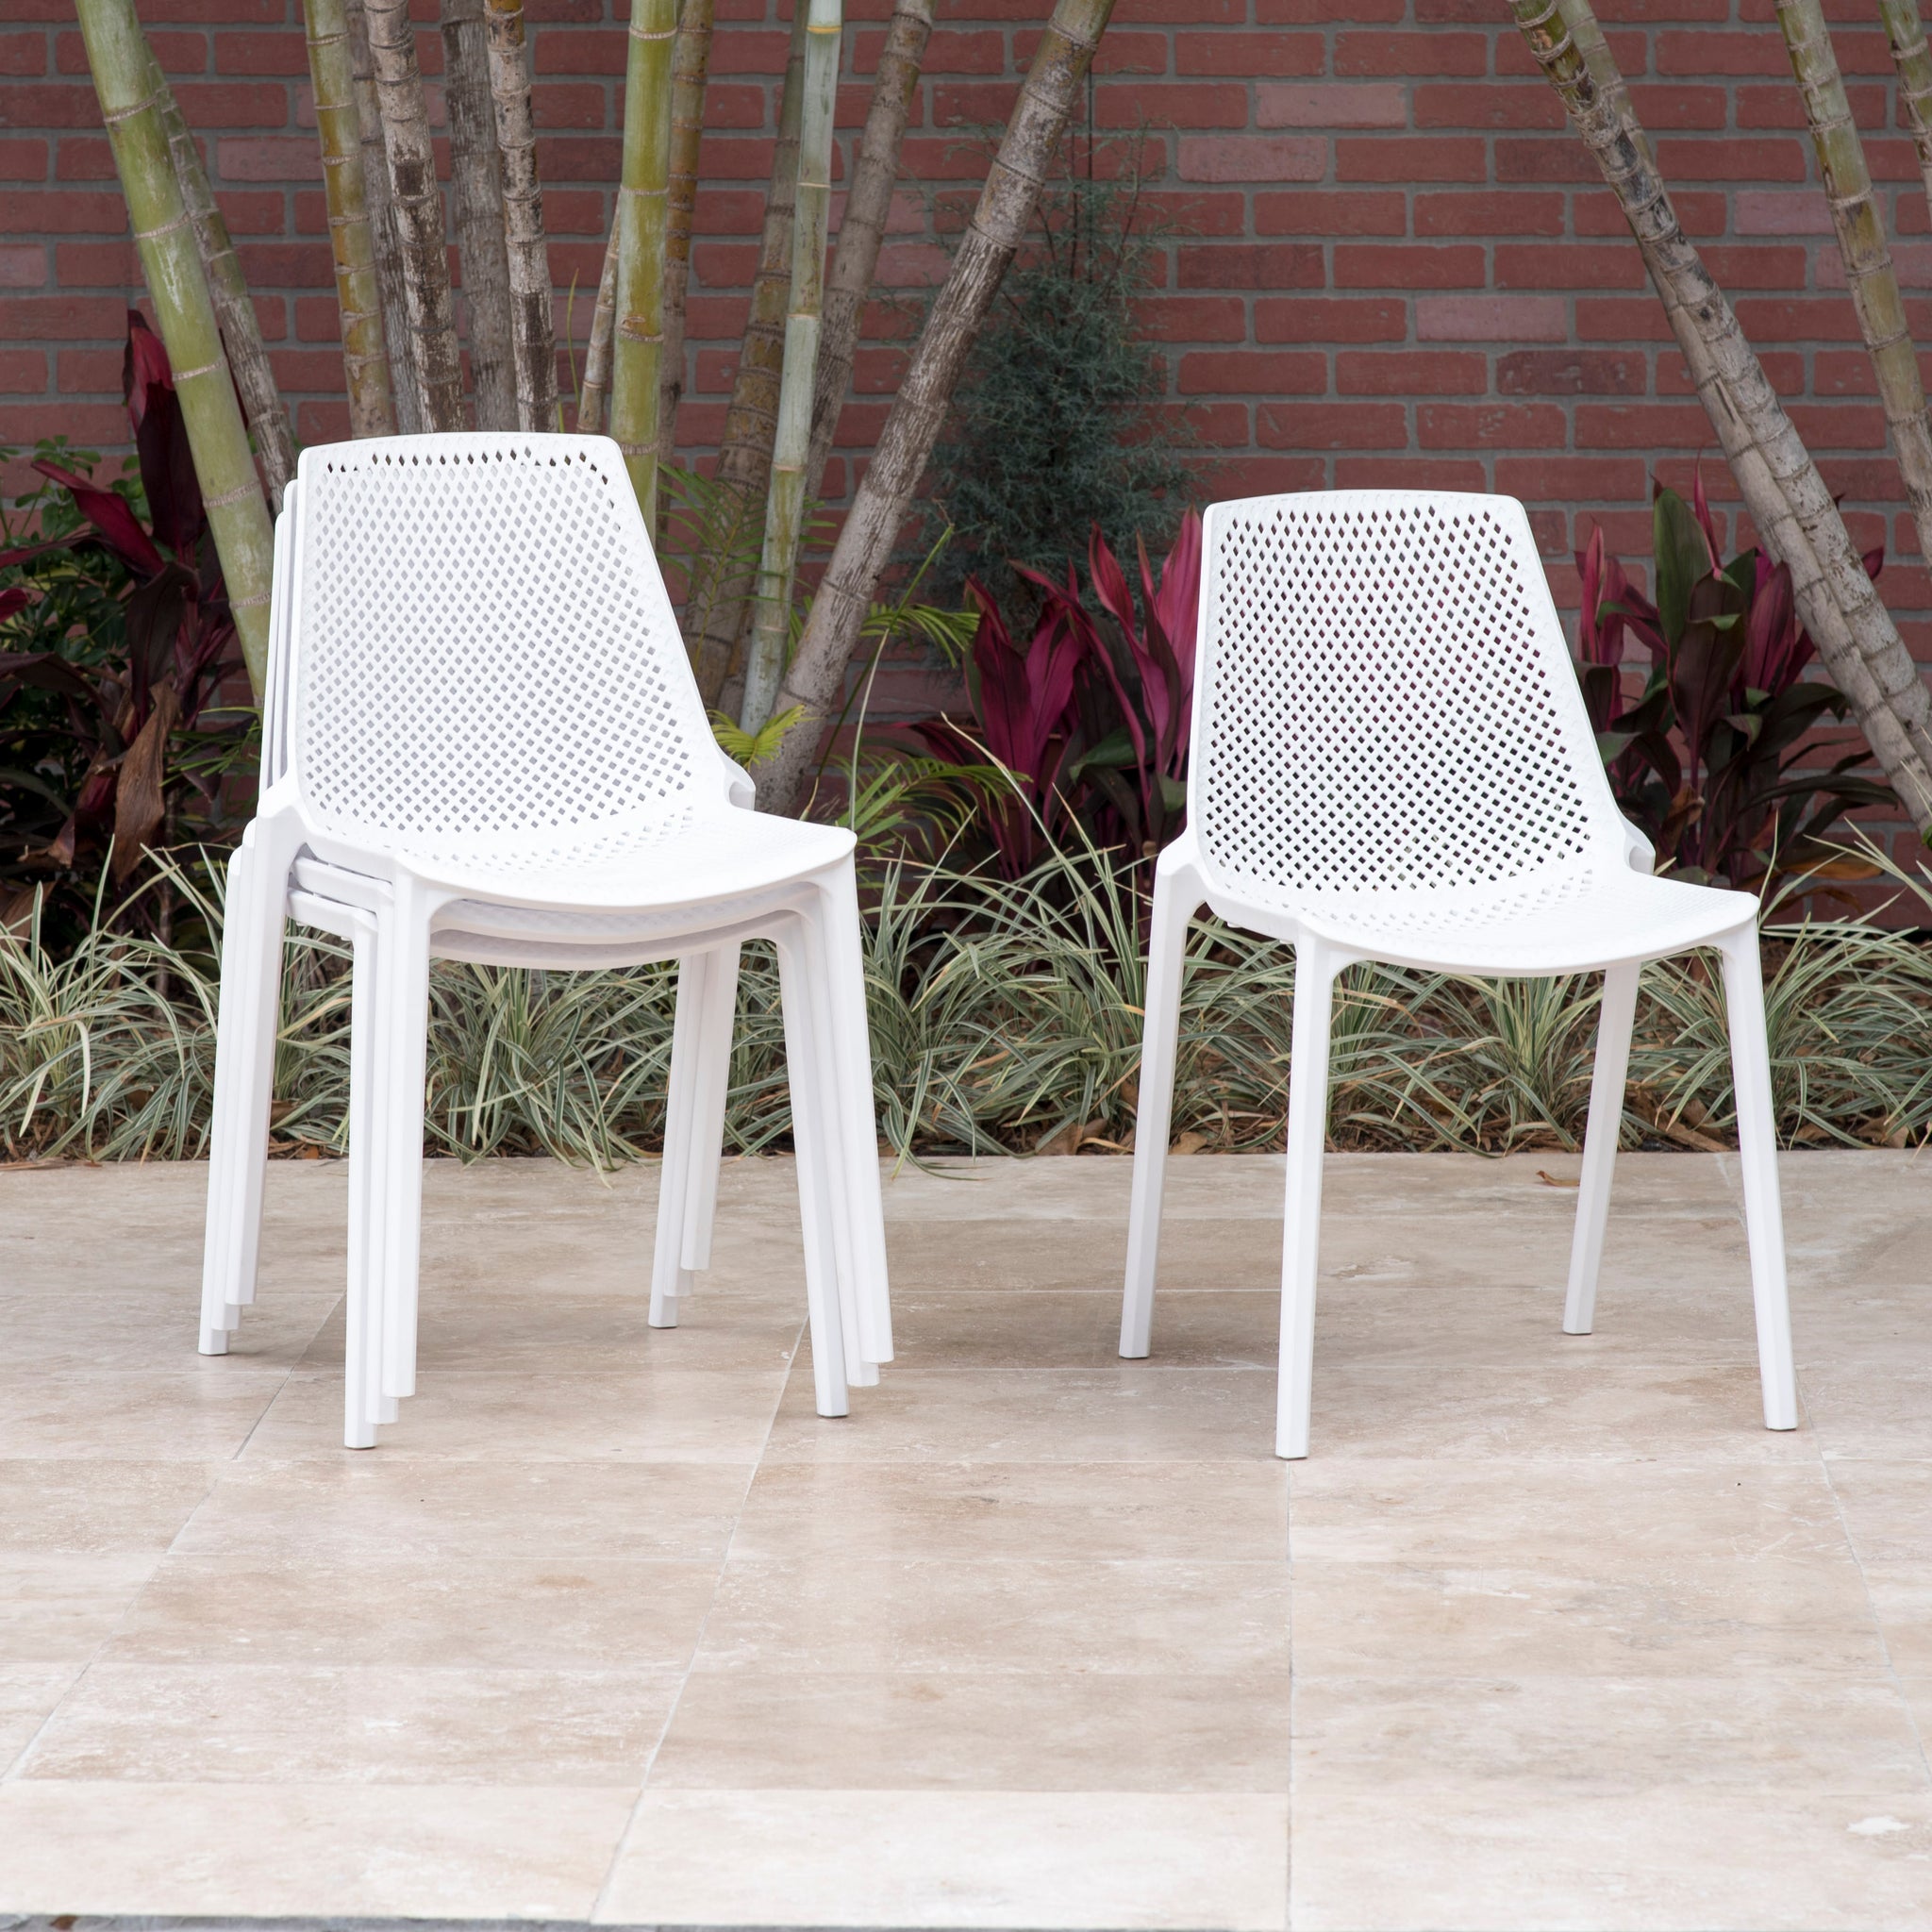 Valencia White Stacking Indoor Dining Chair - 4PC